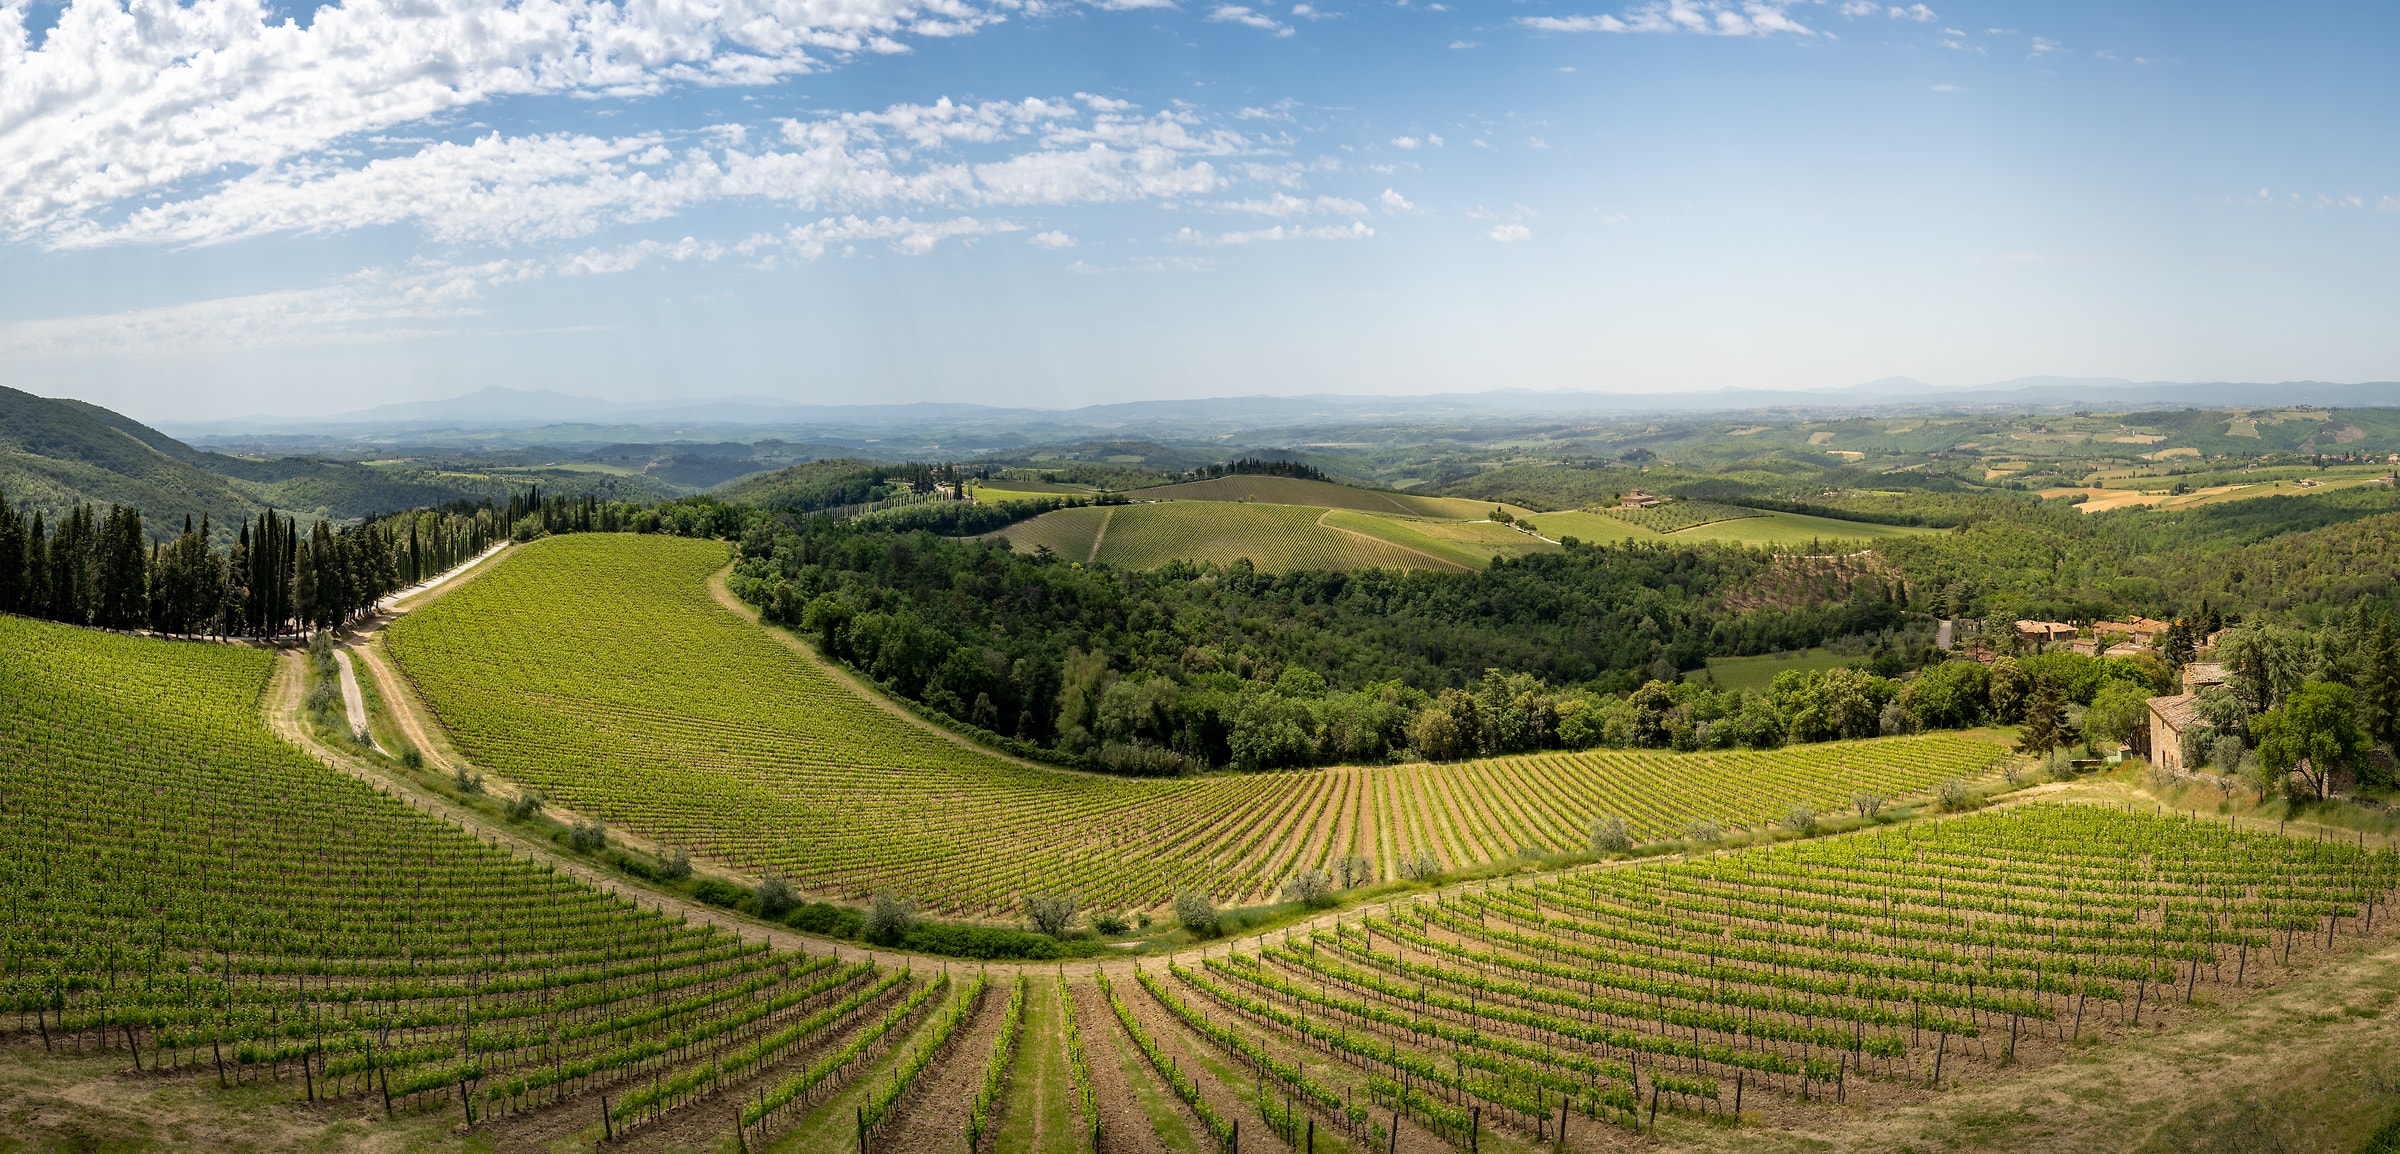 558 megapixels! A very high resolution, large-format VAST photo print of wine vineyards; landscape photograph created by Justin Katz in Castello di Brolio, Gaiole in Chianti, Tuscany, Italy.